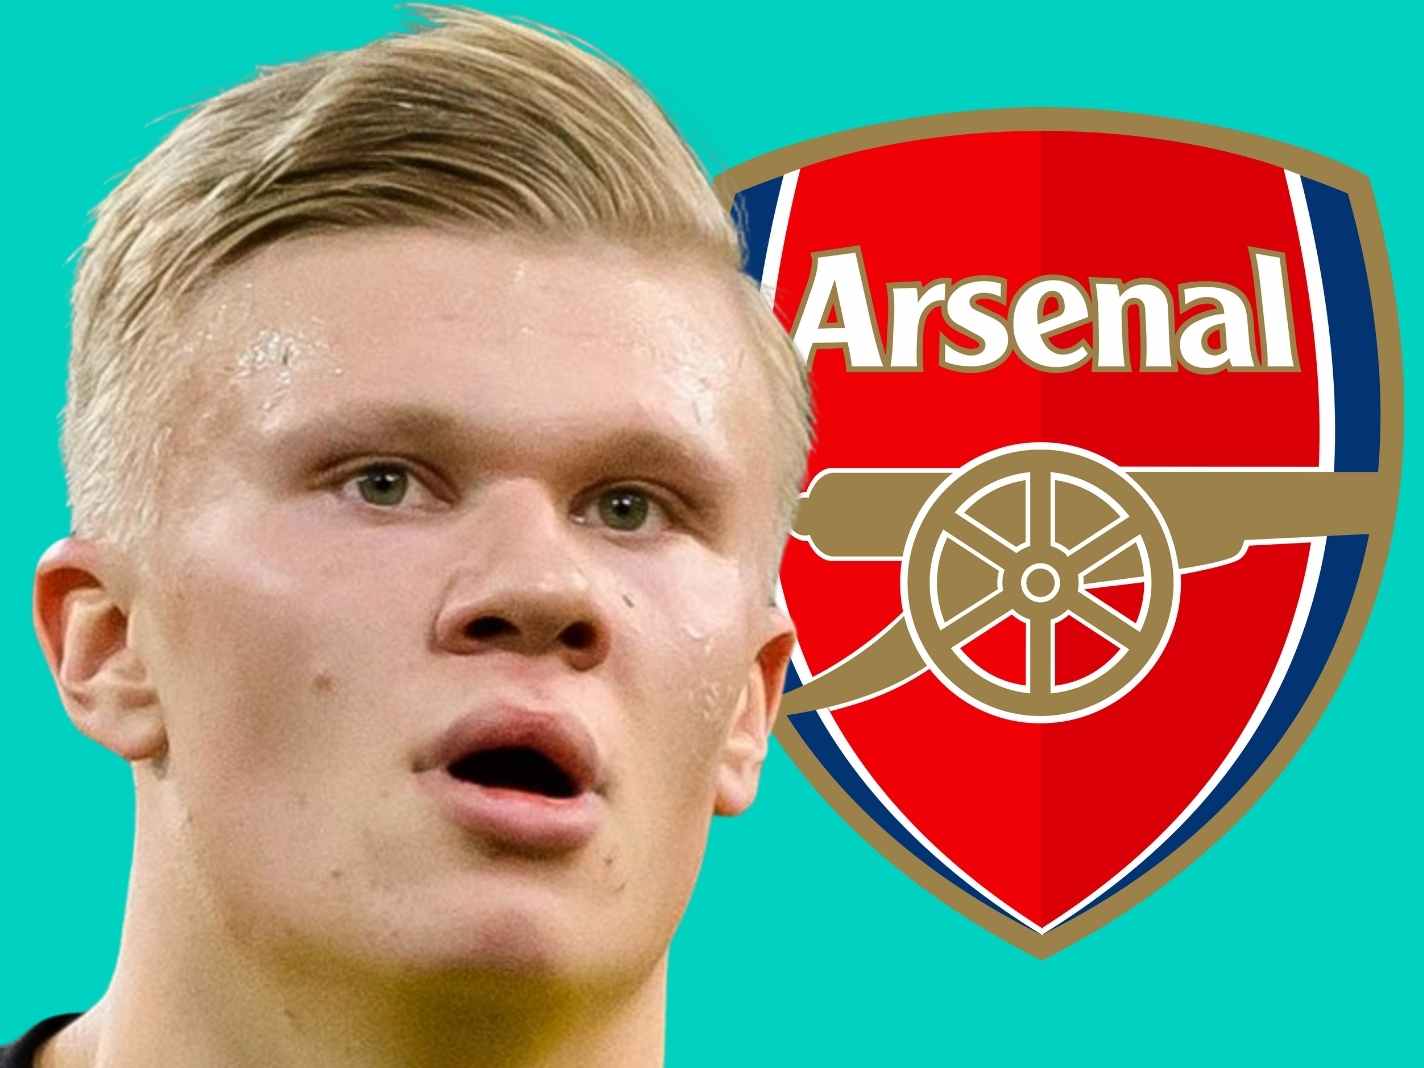 Erling Haaland exposed as Arsenal fan after old photo in Nike kit emerges online